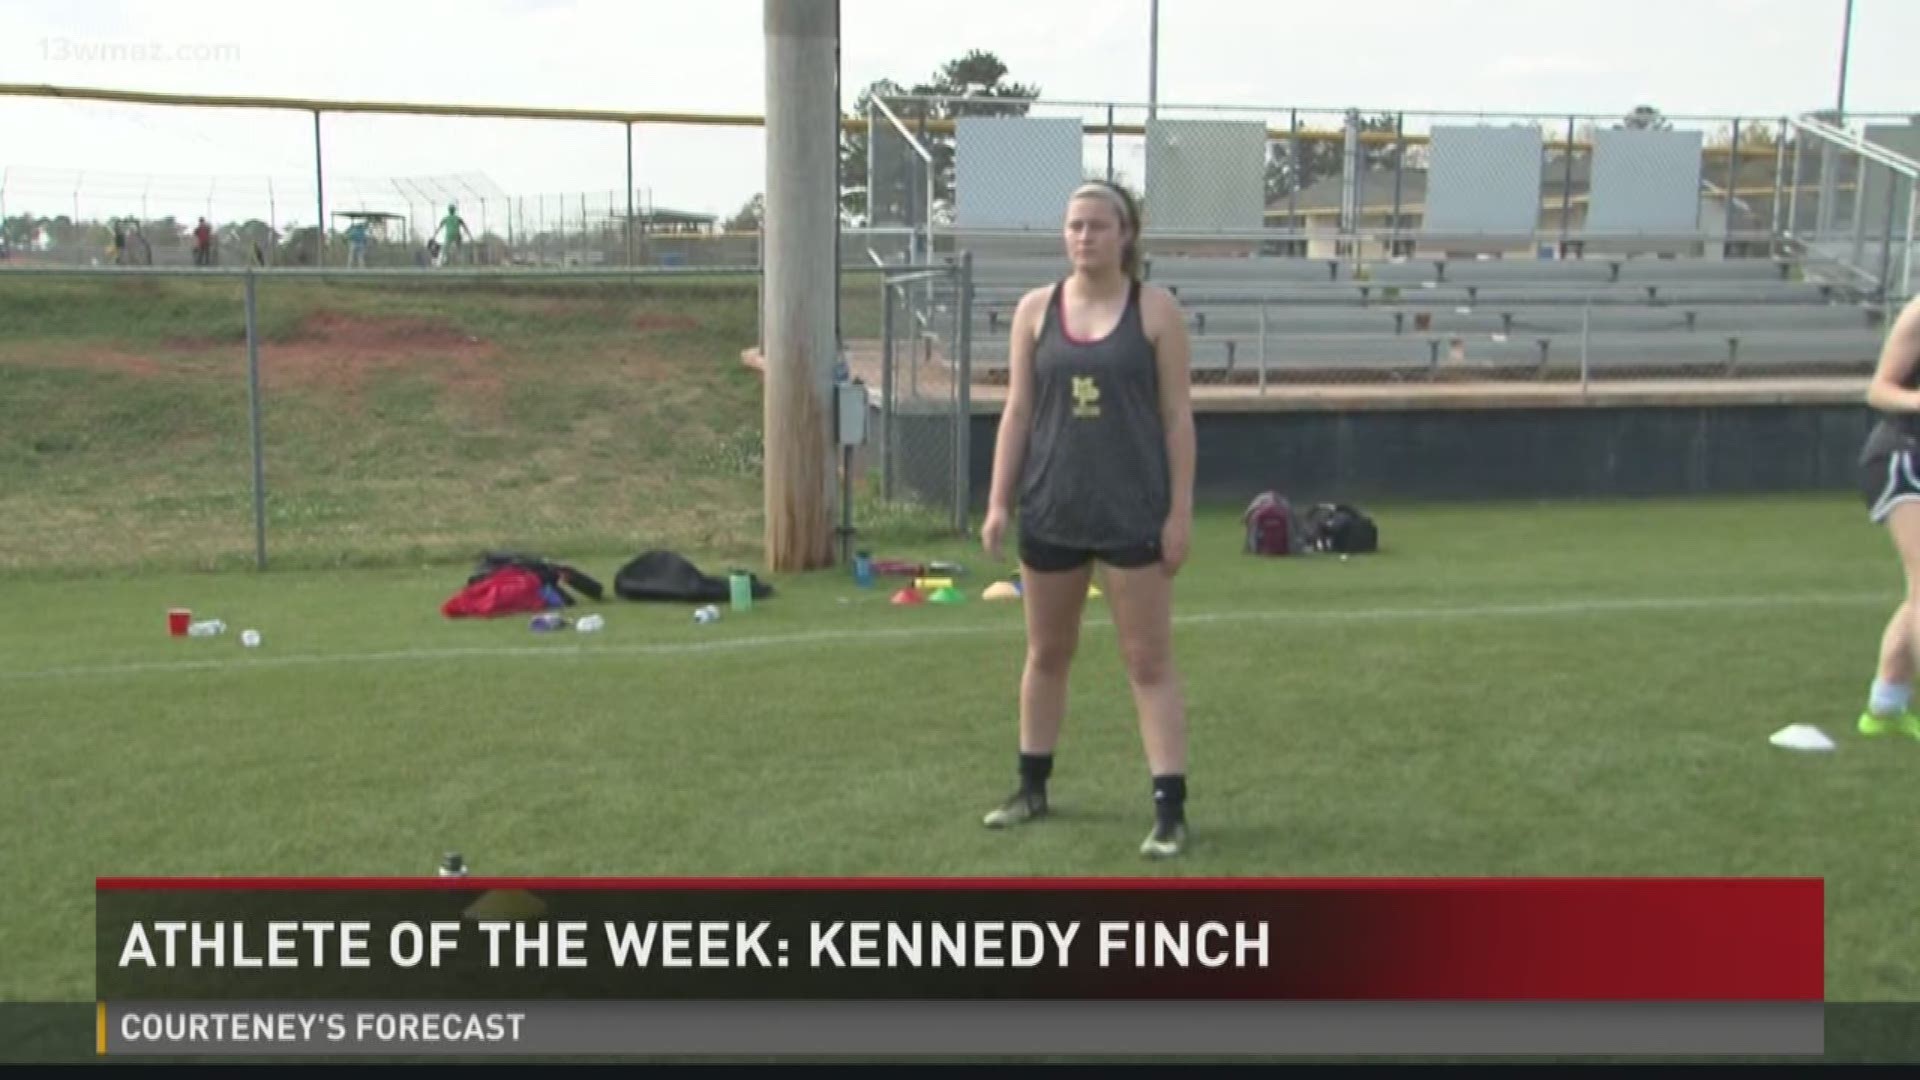 Congratulations to Mary Persons' Kennedy Finch, our Athlete of the Week.